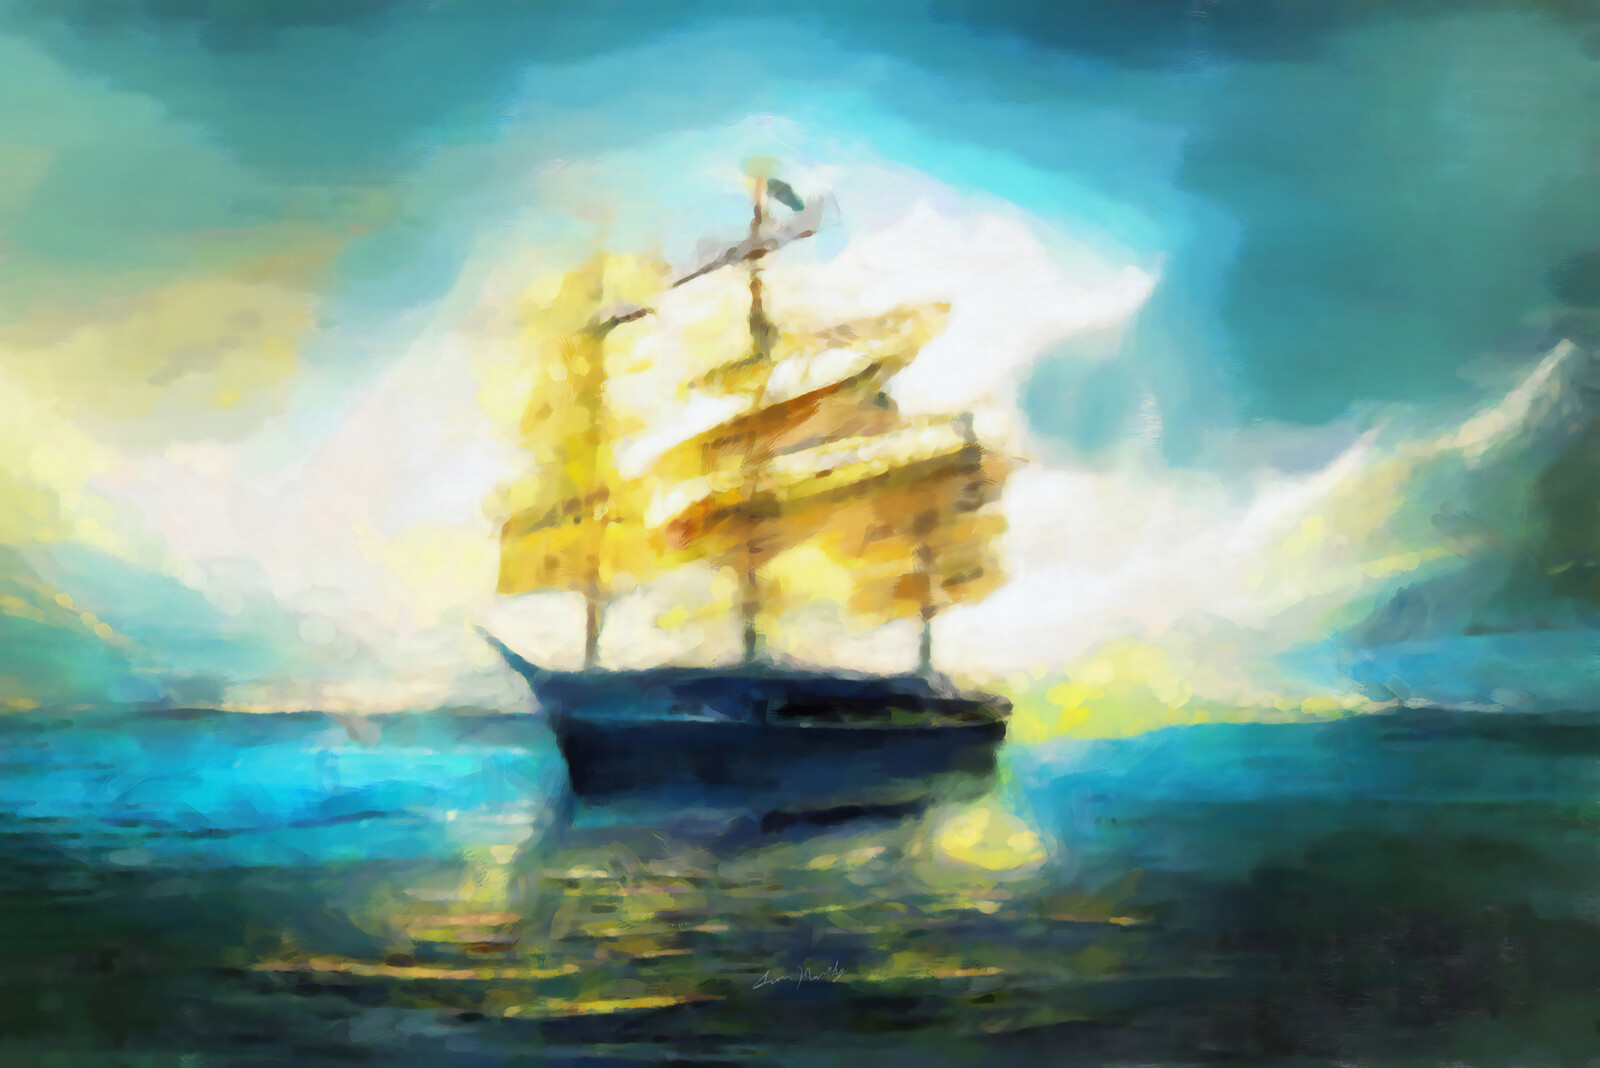 Final Artwork of a ship with a war-torn foremast anchored offshore.